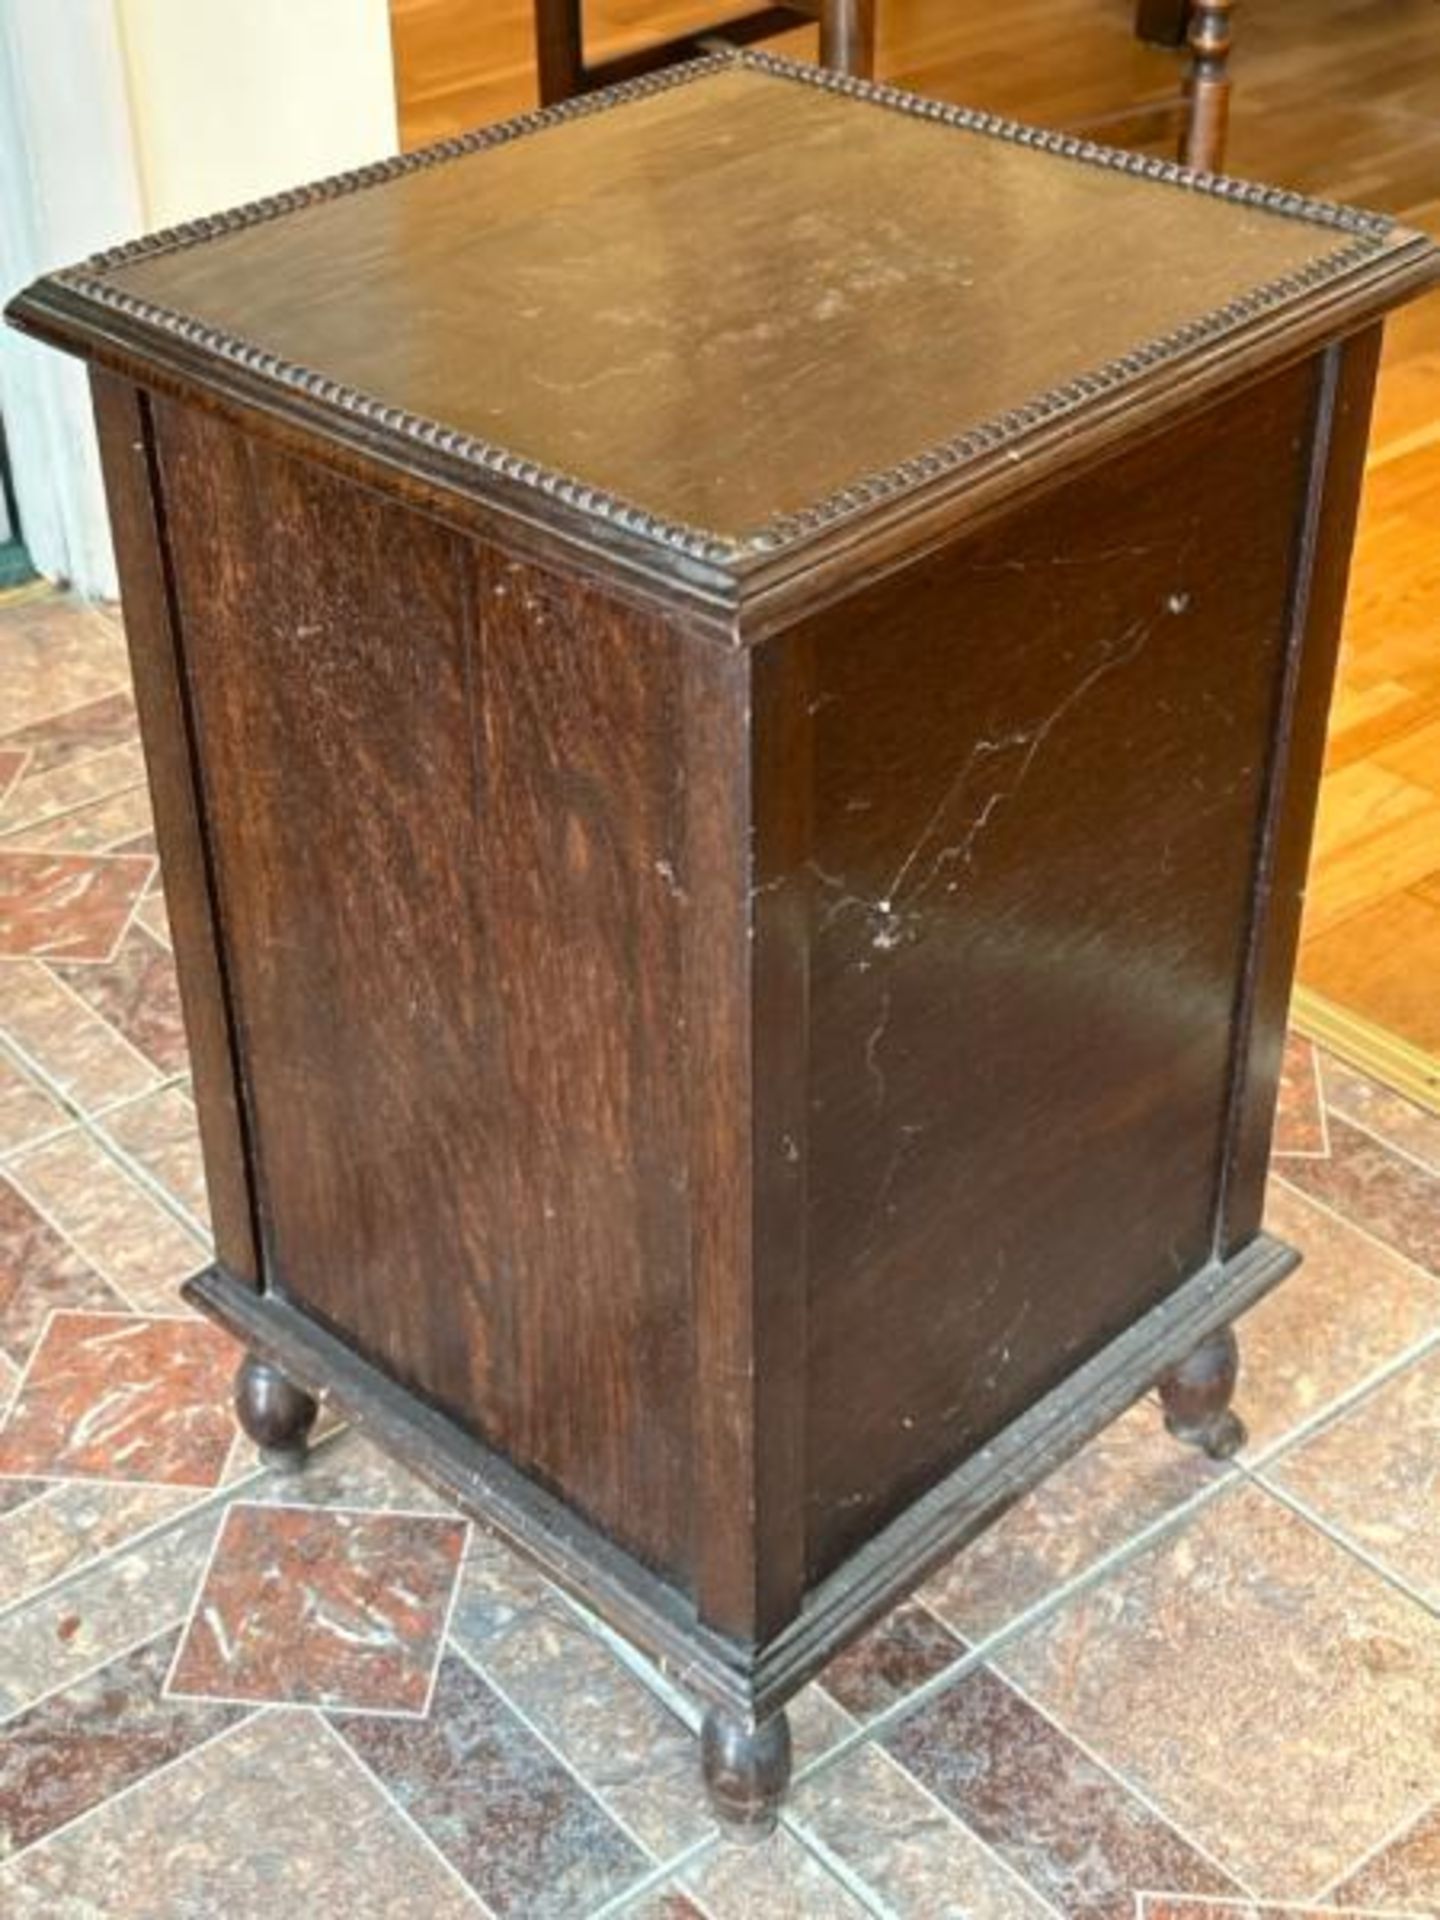 Antique coal scuttle in oak cabinet on casters, 40x65x38cm (collection from private residence in - Image 4 of 4